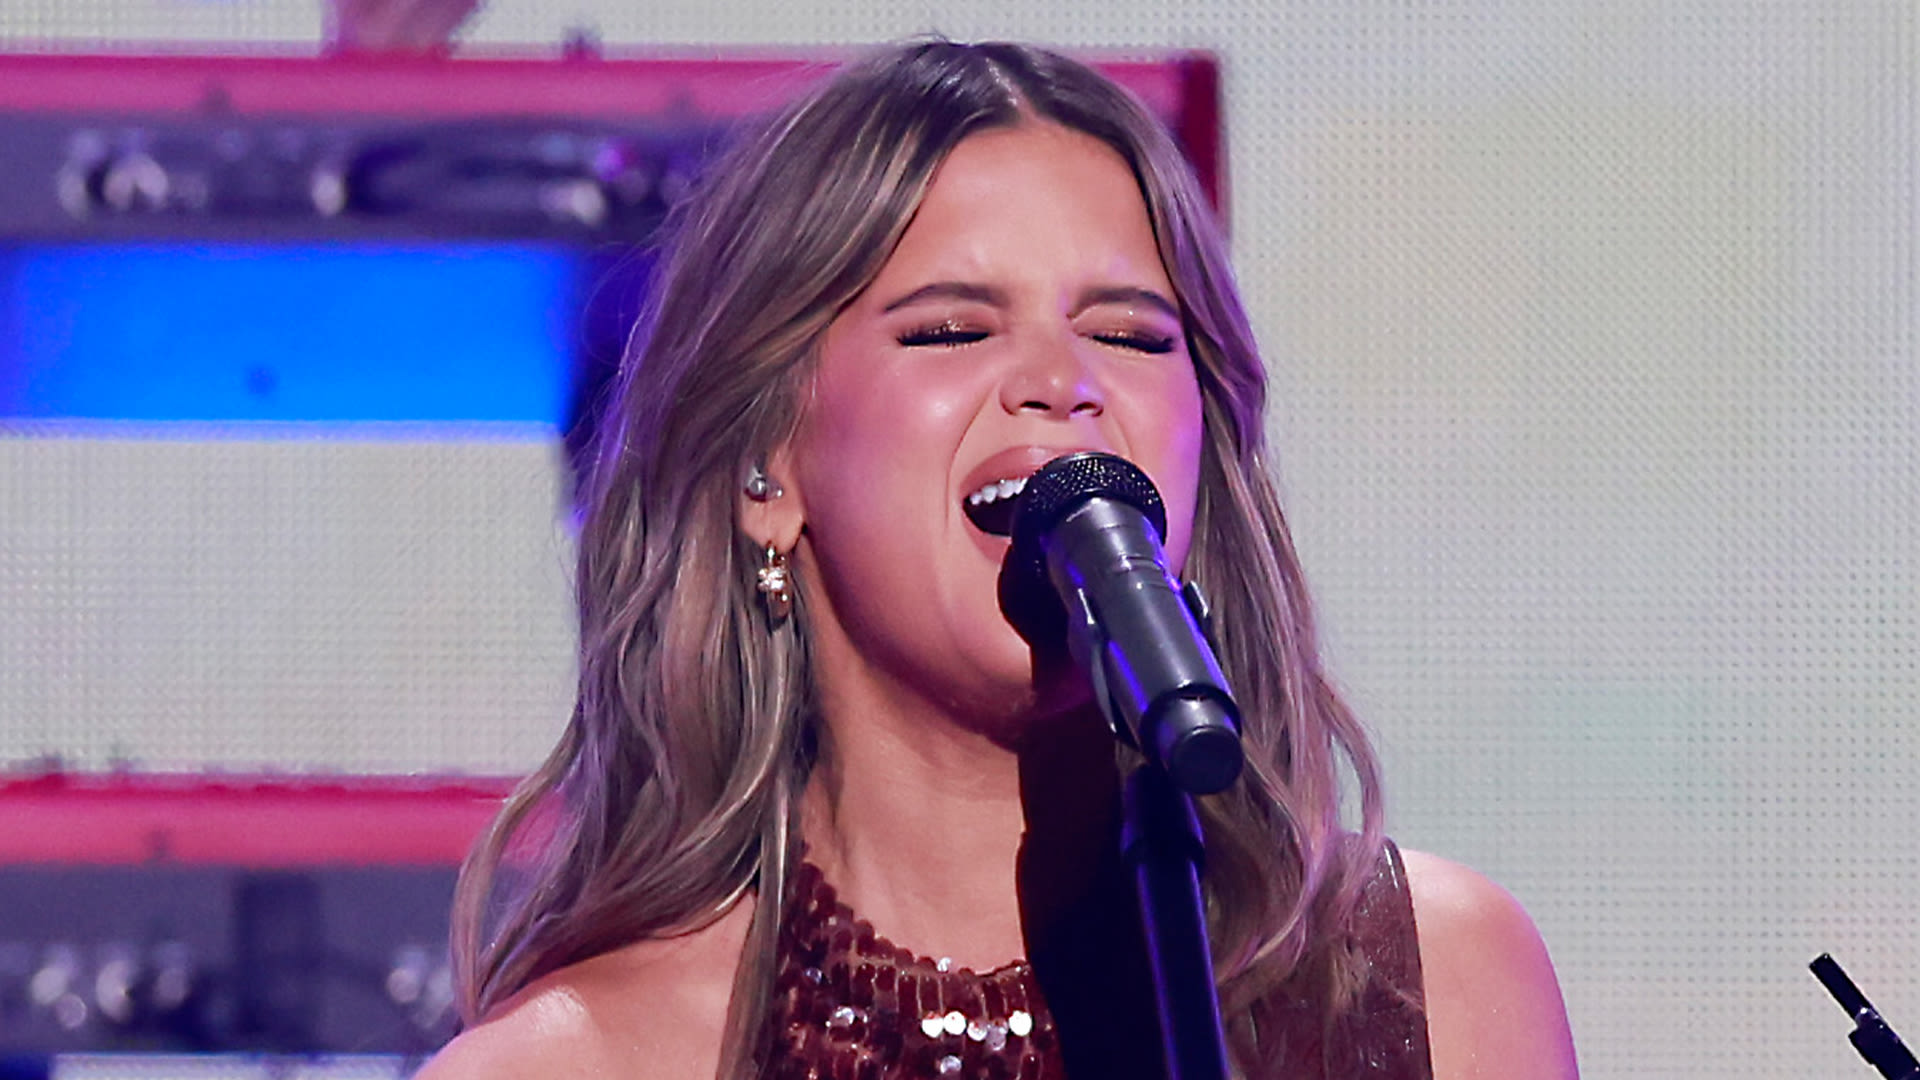 Maren Morris goes topless in new photos as singer leaves fans drooling